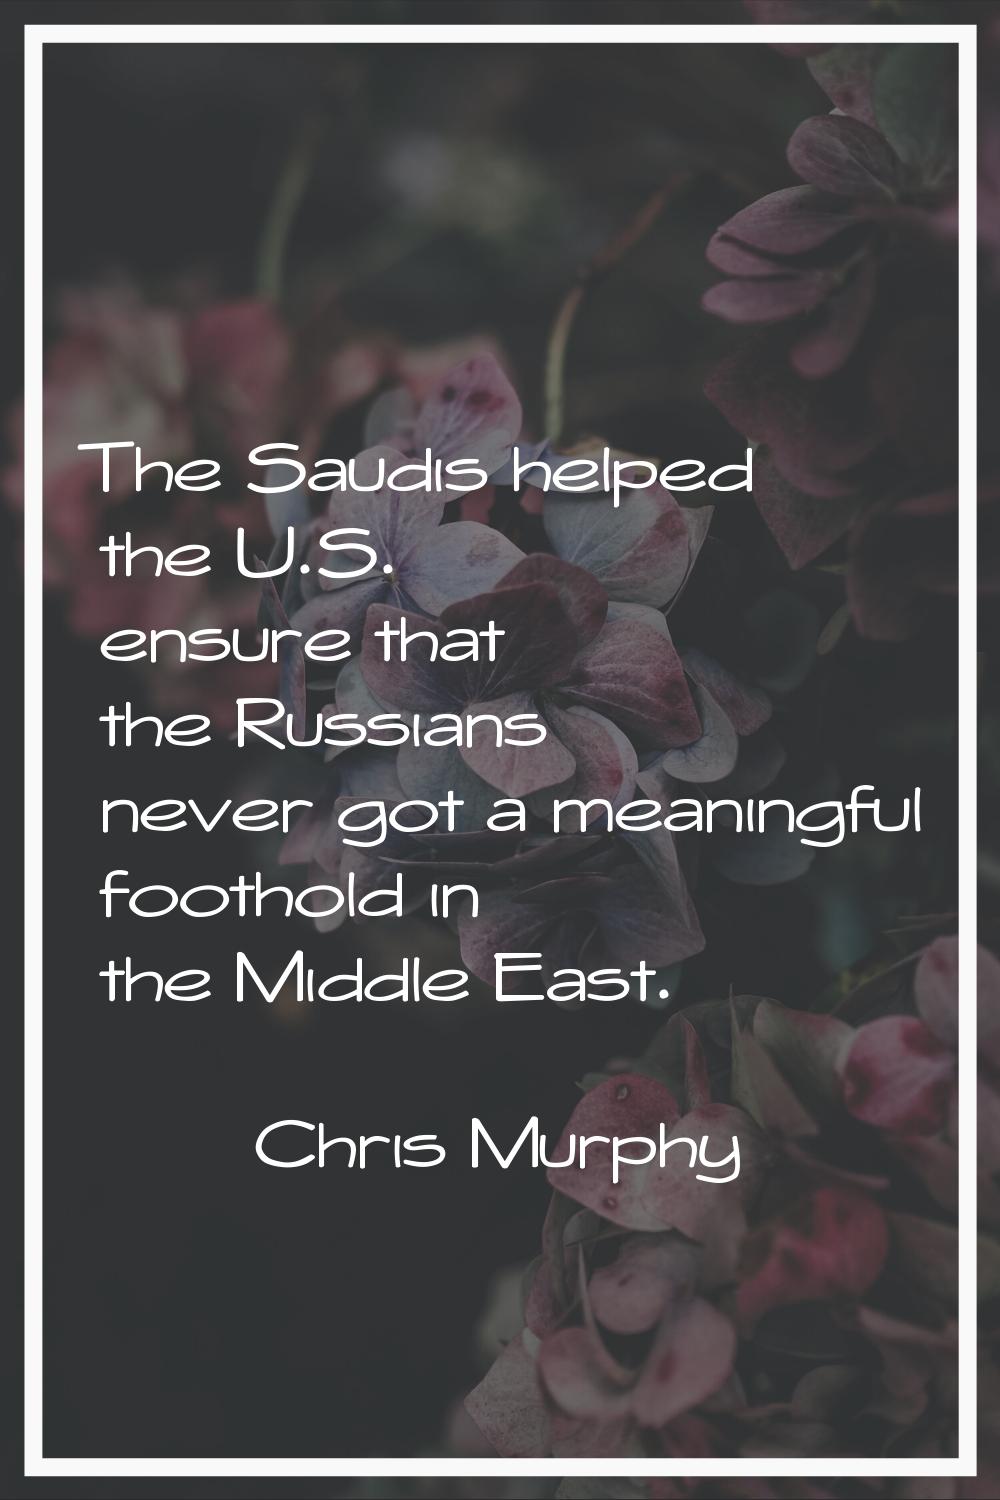 The Saudis helped the U.S. ensure that the Russians never got a meaningful foothold in the Middle E